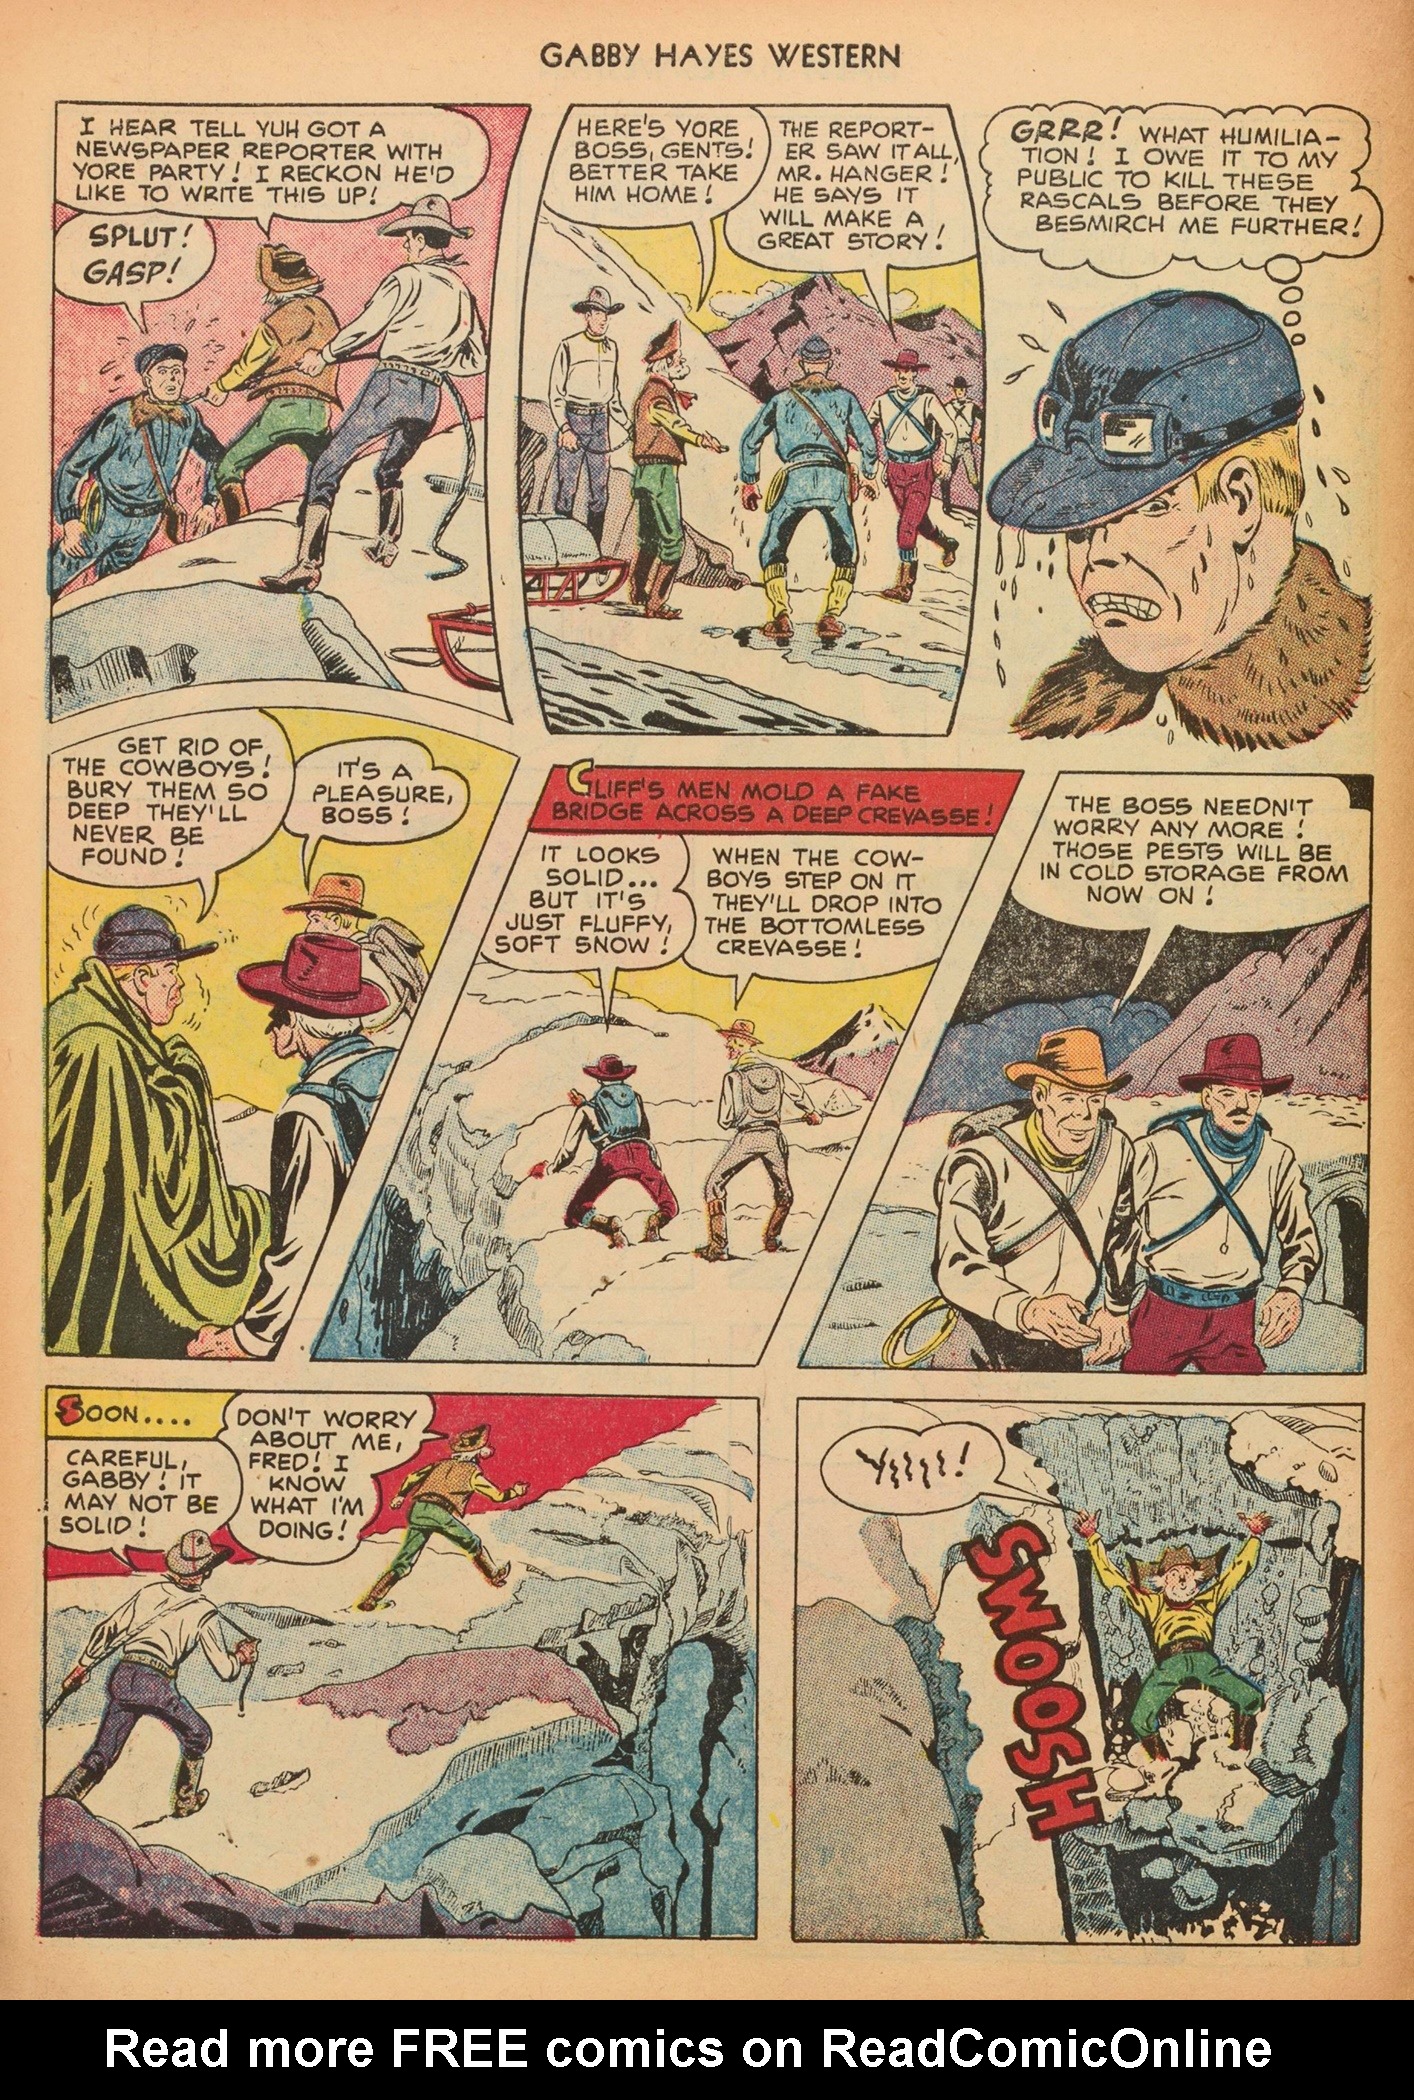 Read online Gabby Hayes Western comic -  Issue #34 - 6